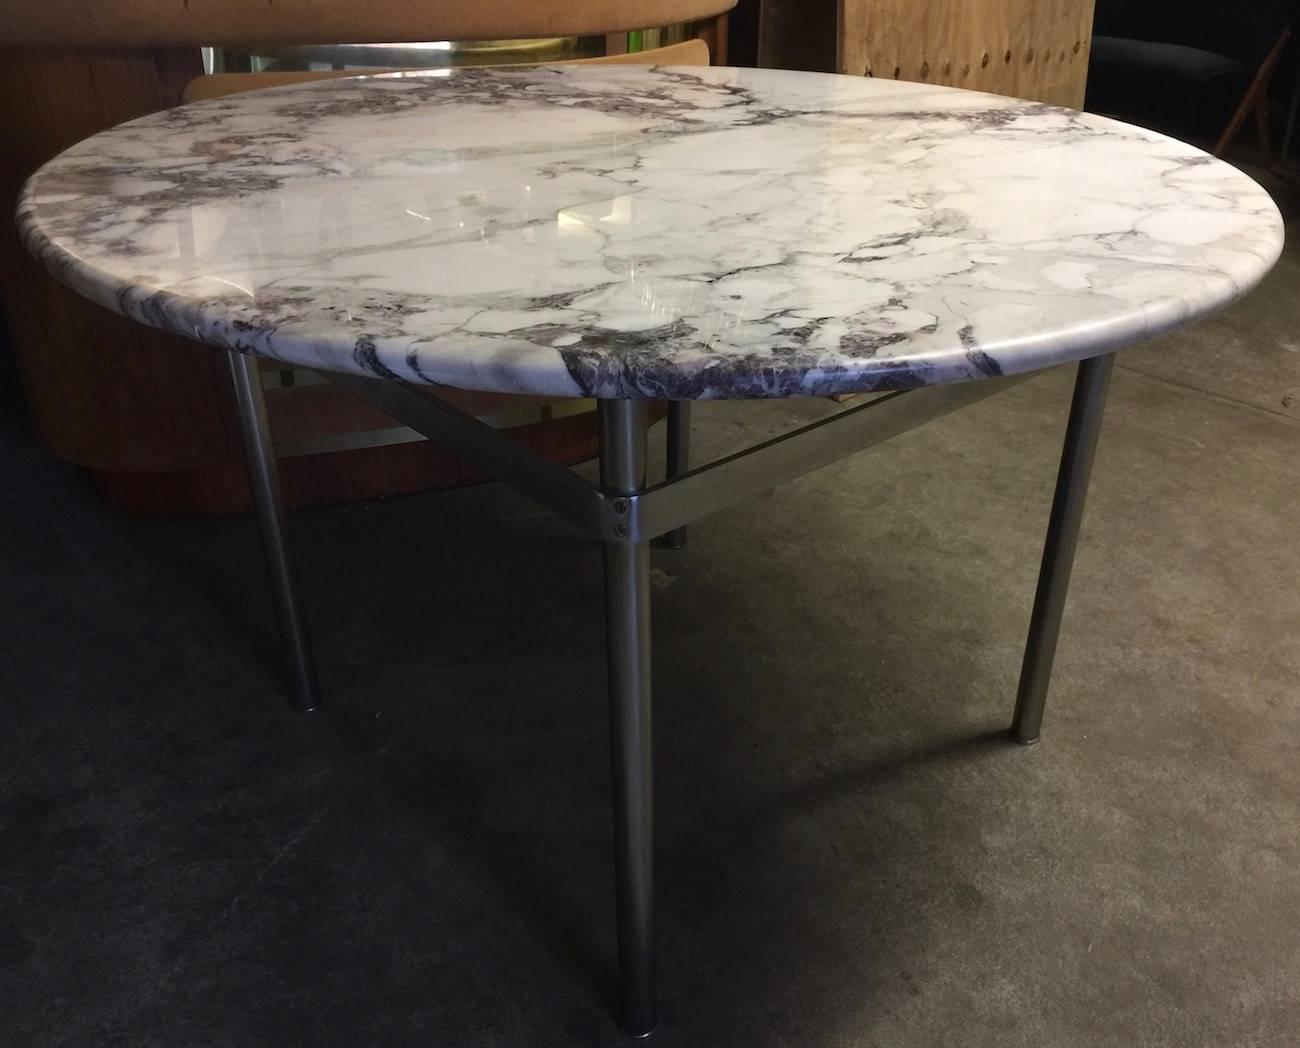 Has also laverne elements heavy marble base with wonderful grain resting on a matte chromed metal base.